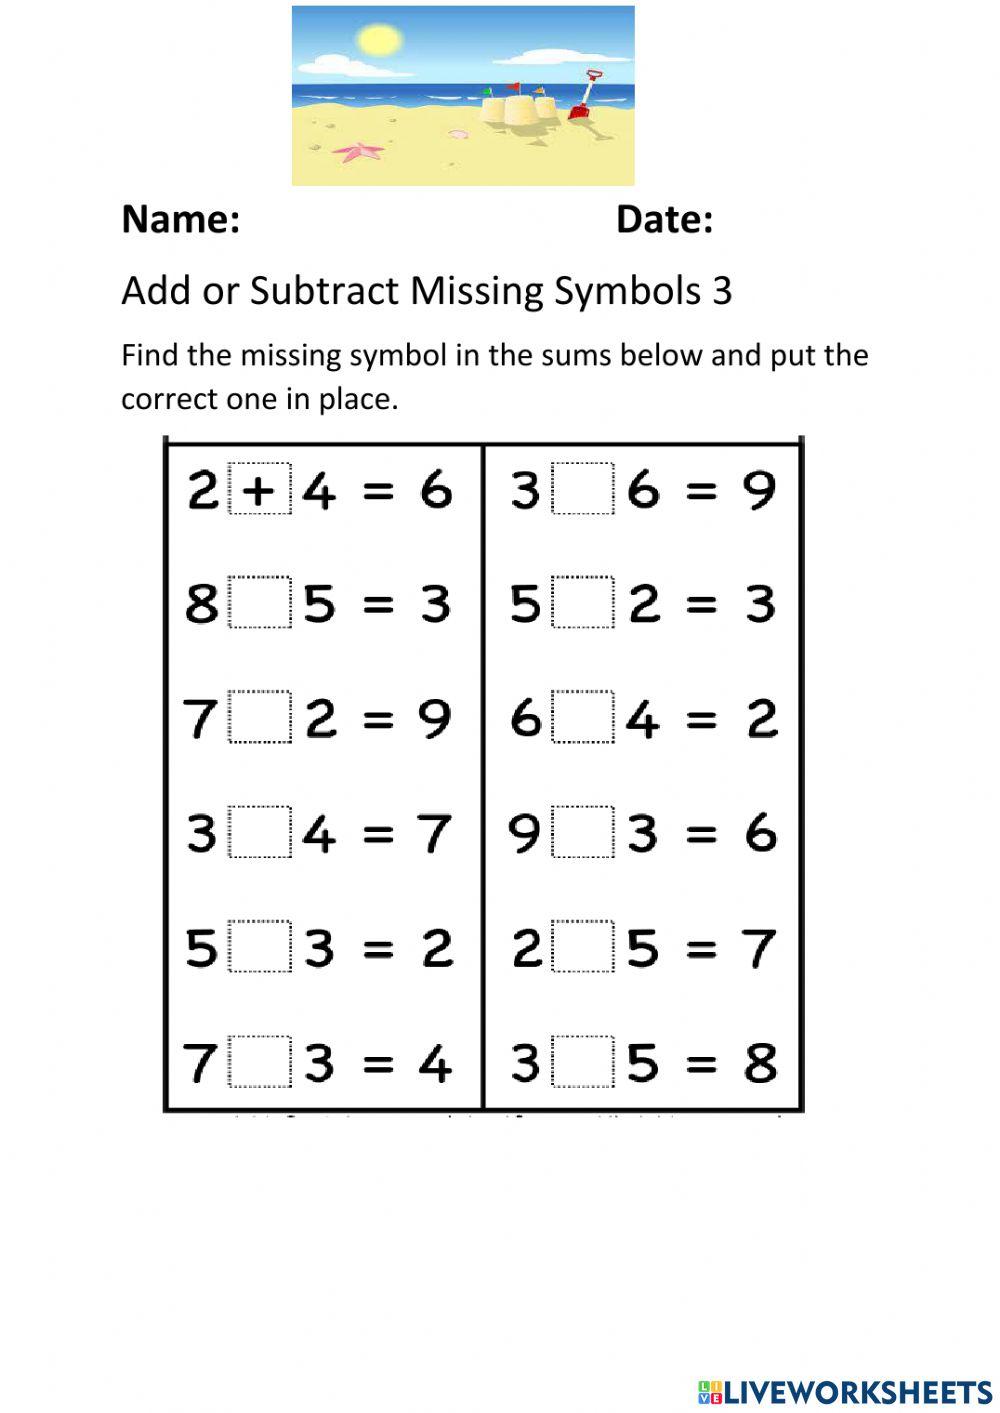 Add or Subtract Missing Symbols 3